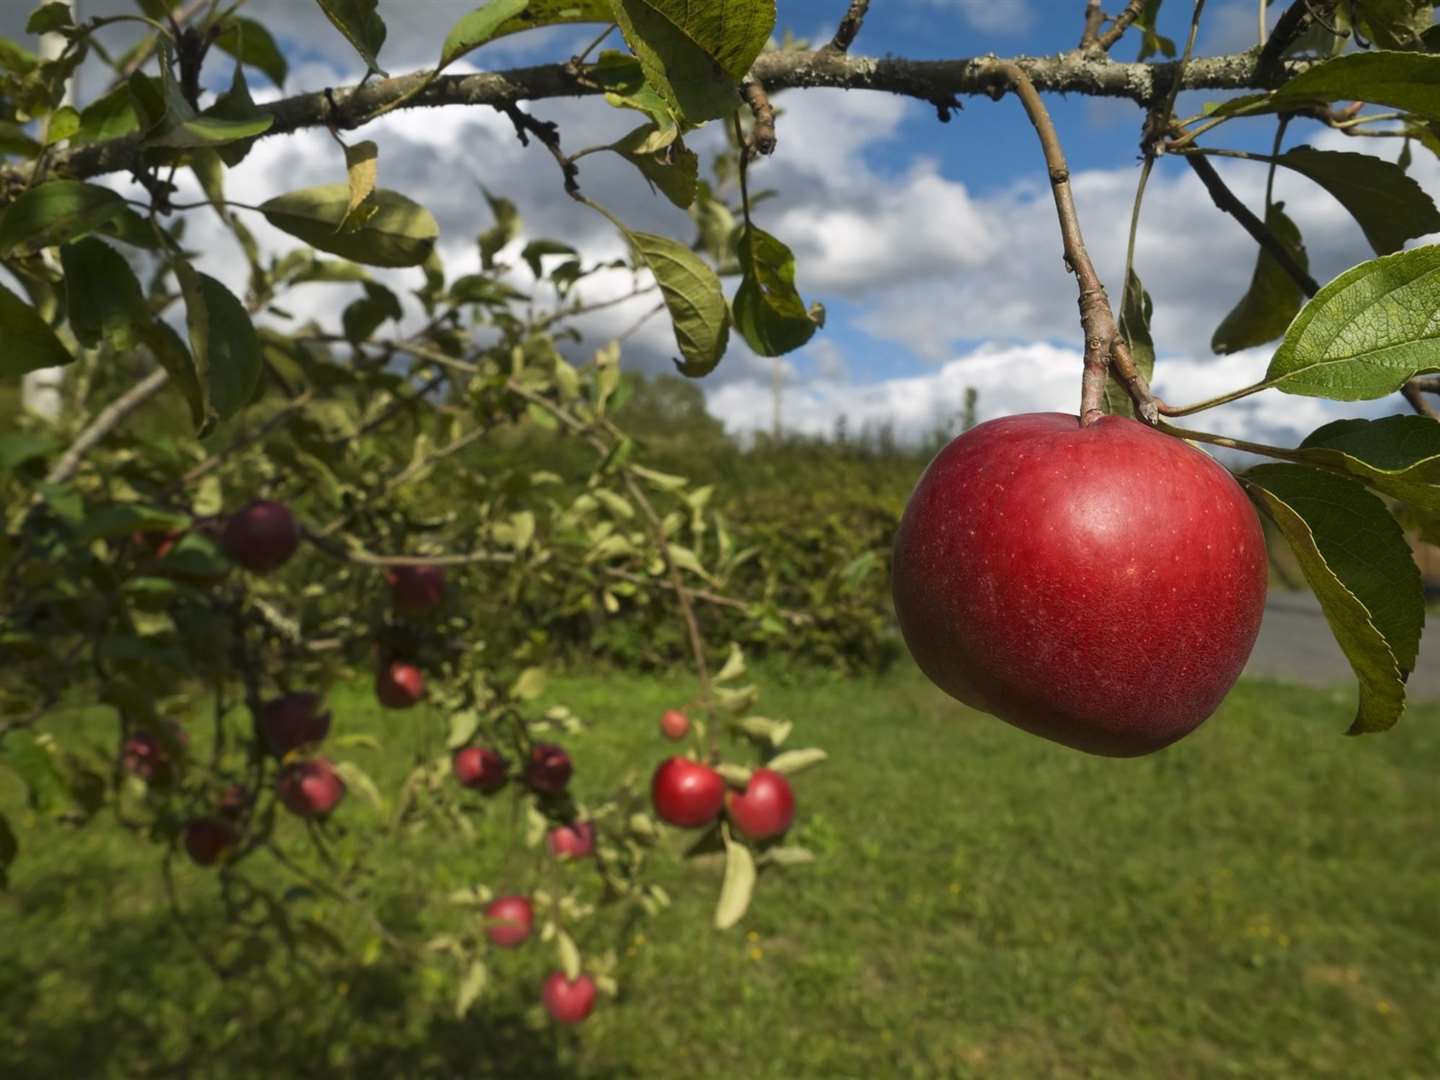 Visitors will be able to see apples in the orchards